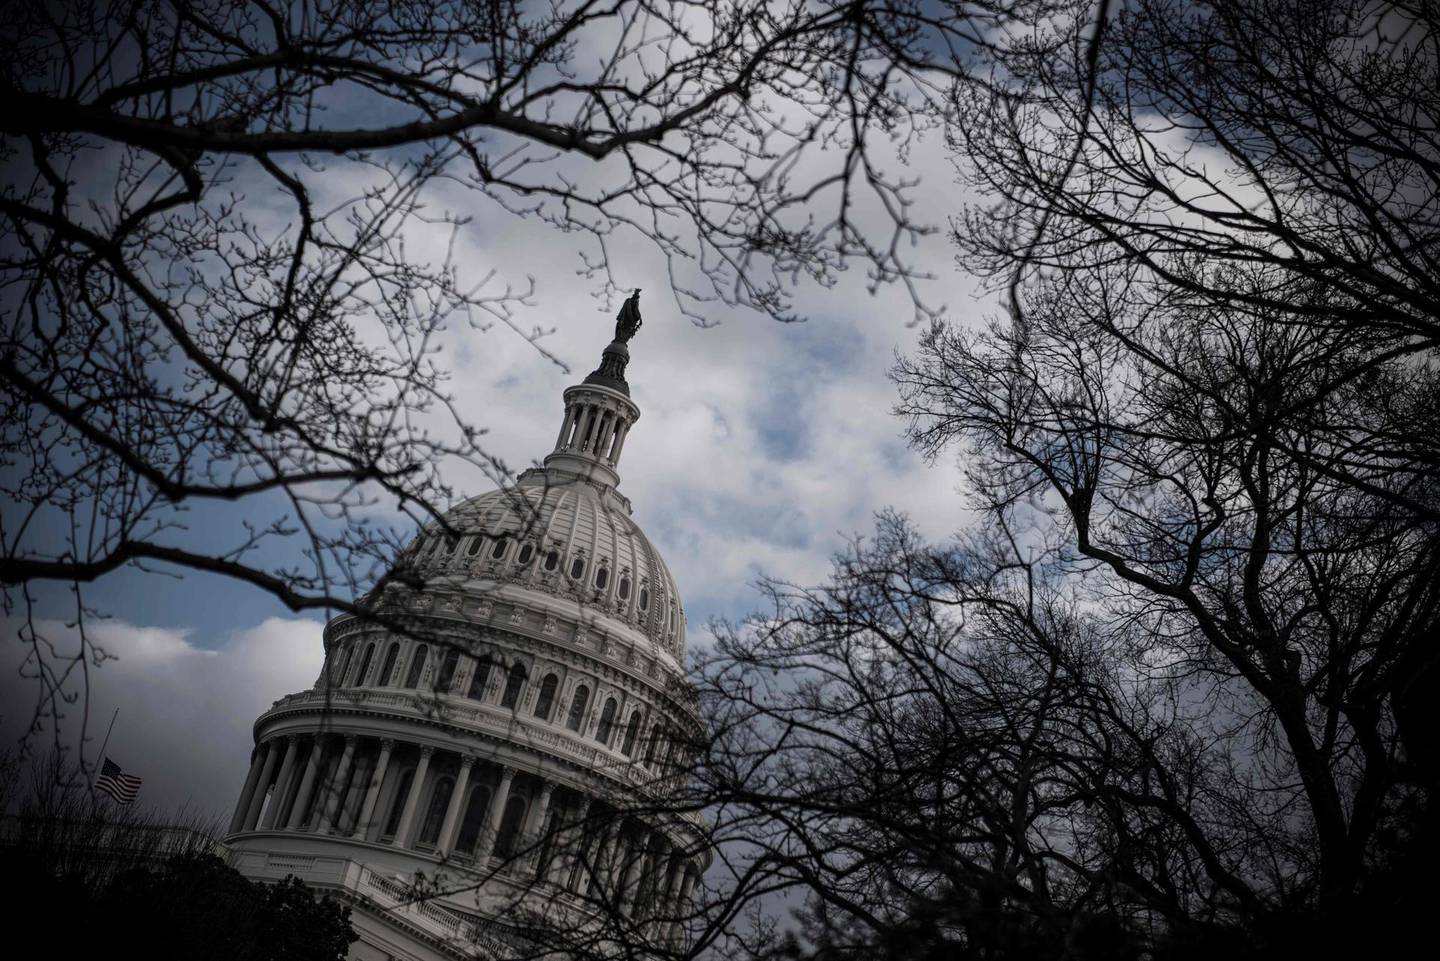 (FILES) In this file photo taken on December 24, 2018 the US Capitol is seen in Washington DC. Donald Trump's order to kill a top Iranian commander has laid bare Washington's stark political divide, with Republicans rallying behind the president and Democrats warning that January 3, 2020 attack could trigger a devastating military confrontation. / AFP / Eric BARADAT
